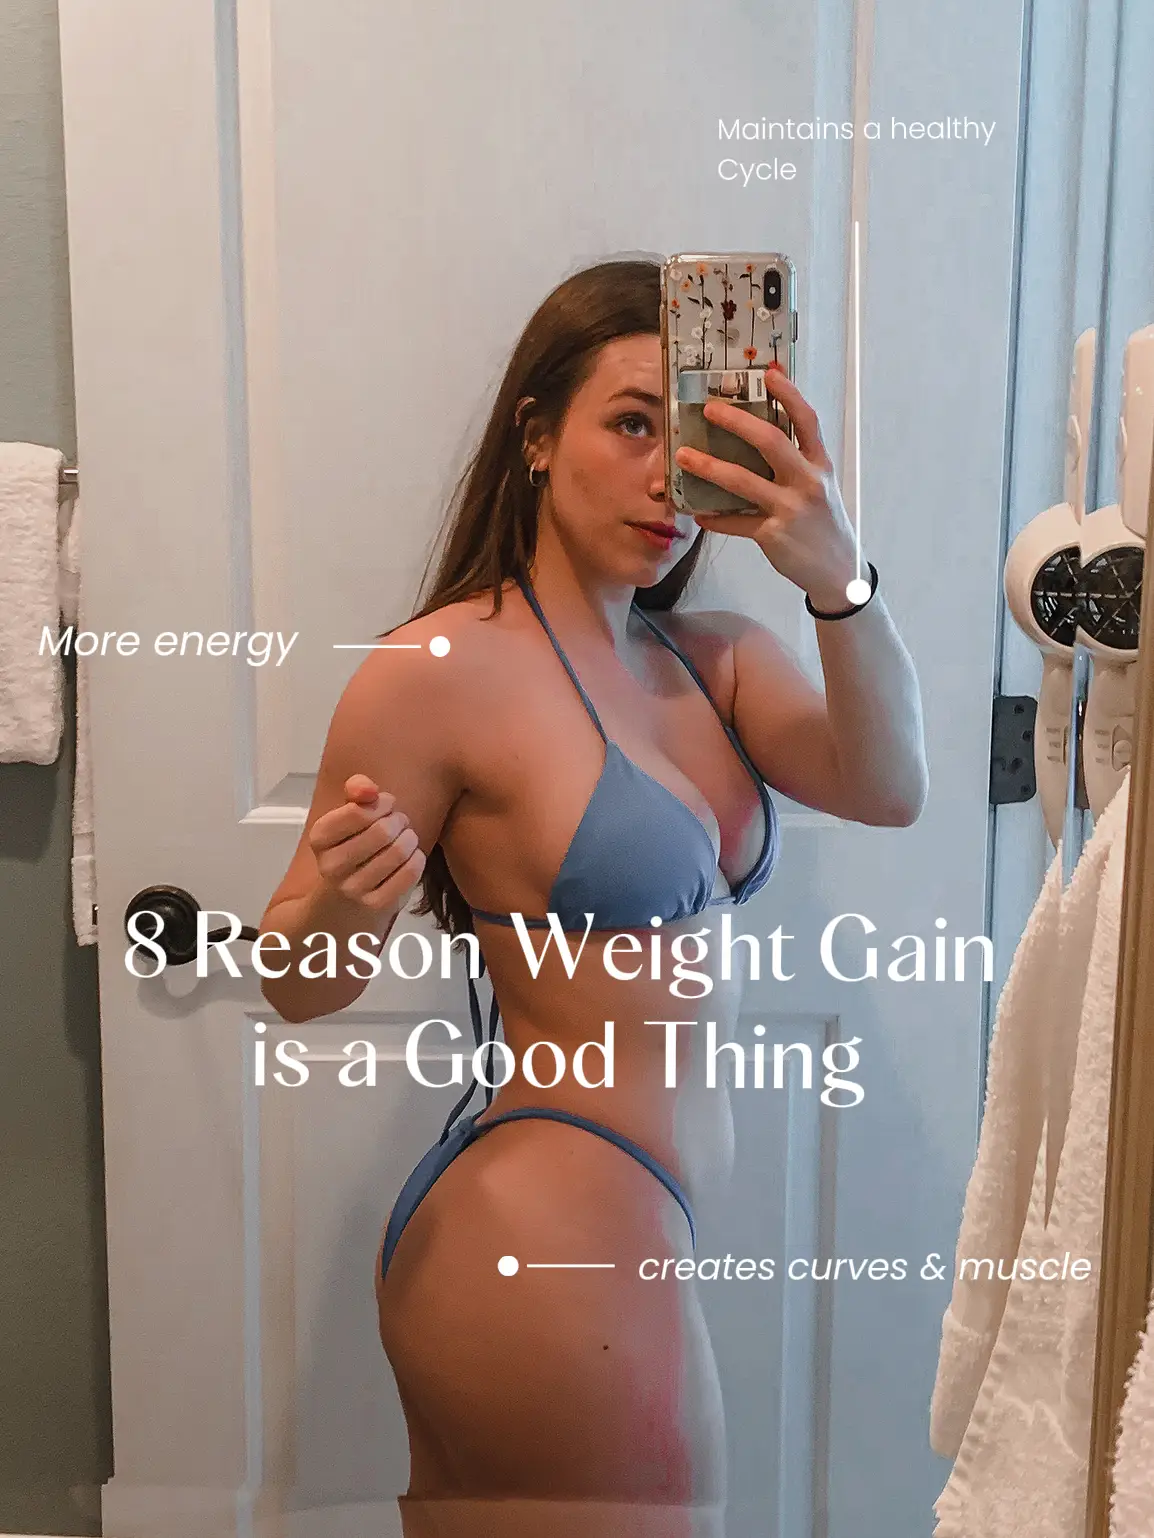 Reasons weight gain can be a GOOD THING